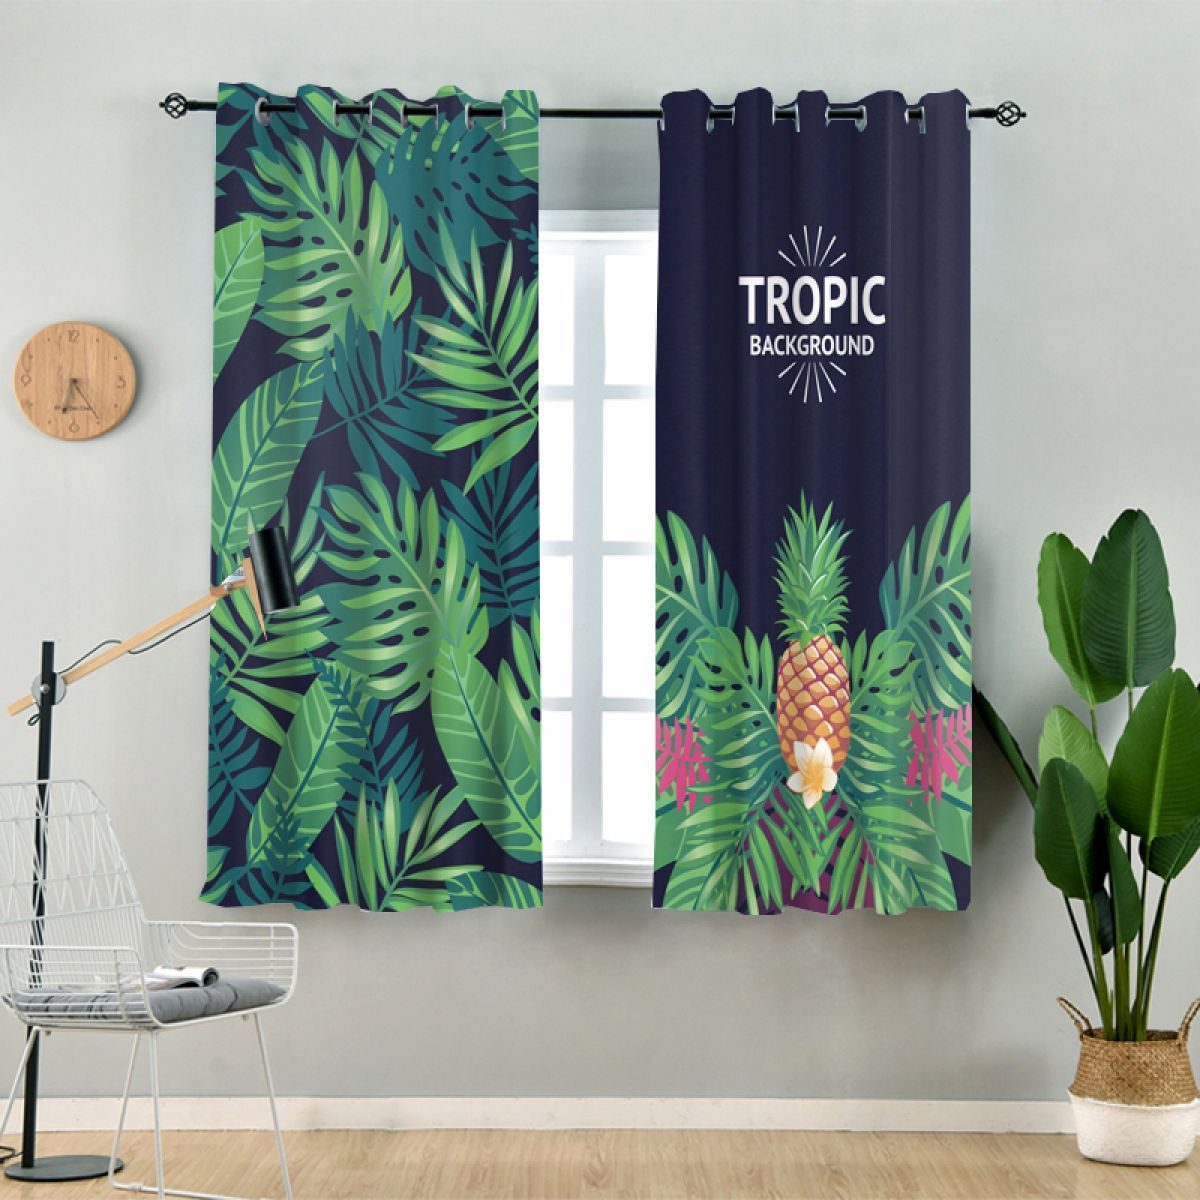 Tropic Tropical Forest And Pineapple Printed Window Curtain Home Decor